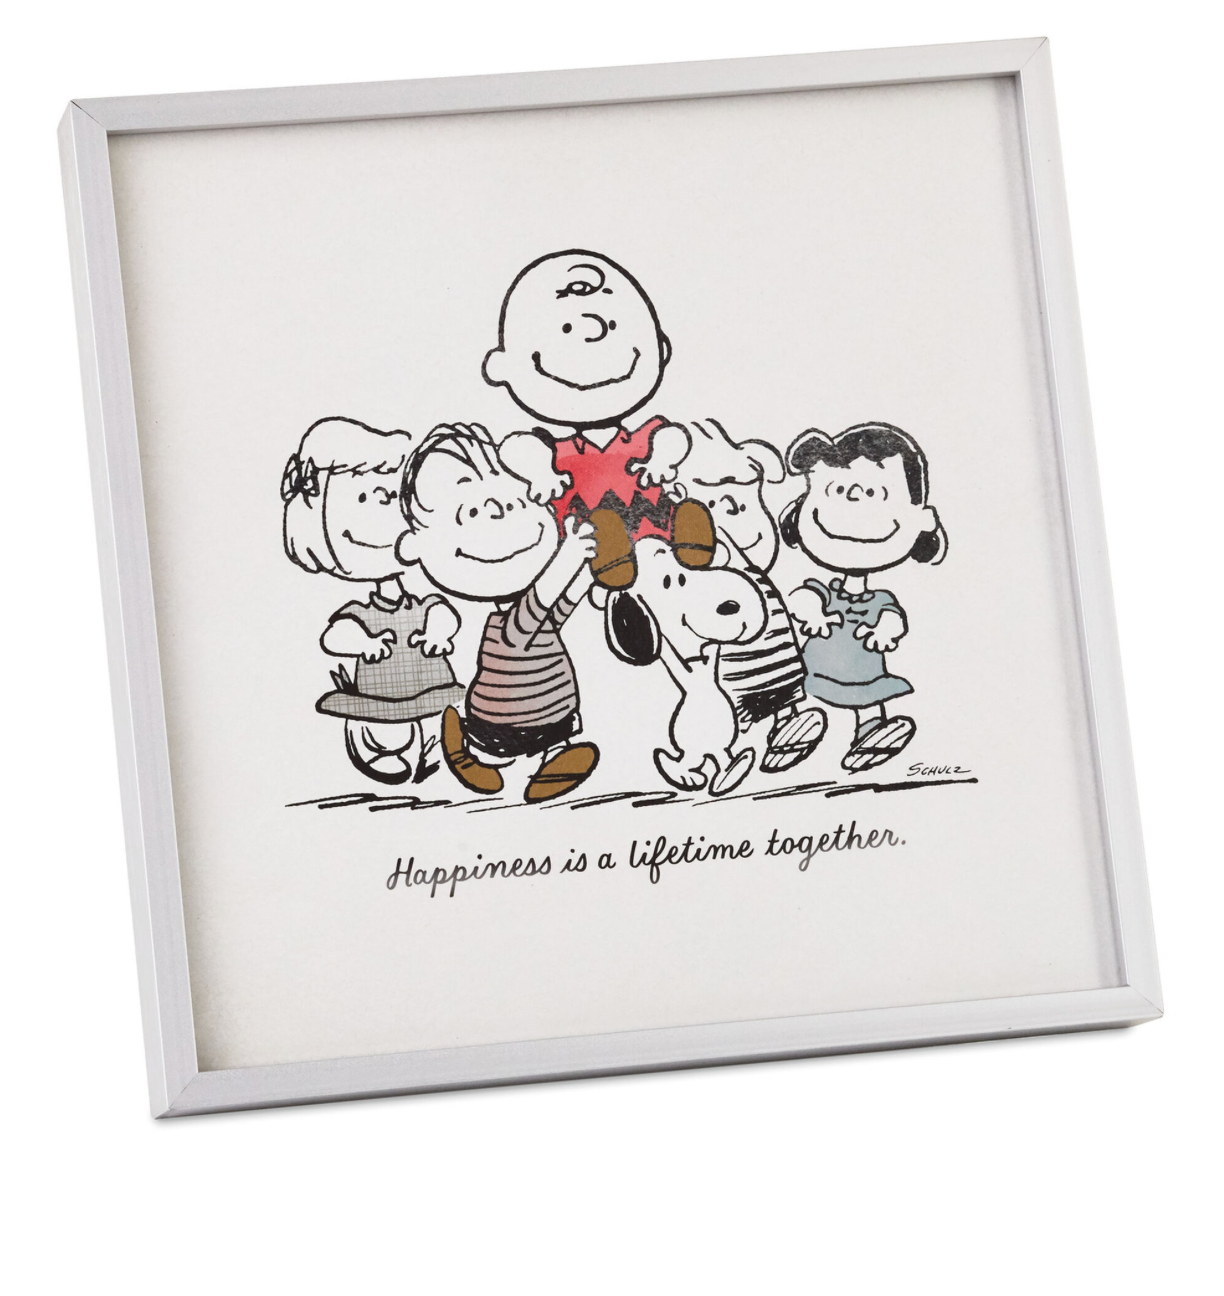 Hallmark Peanuts Happiness Together Framed Art Quote Sign New